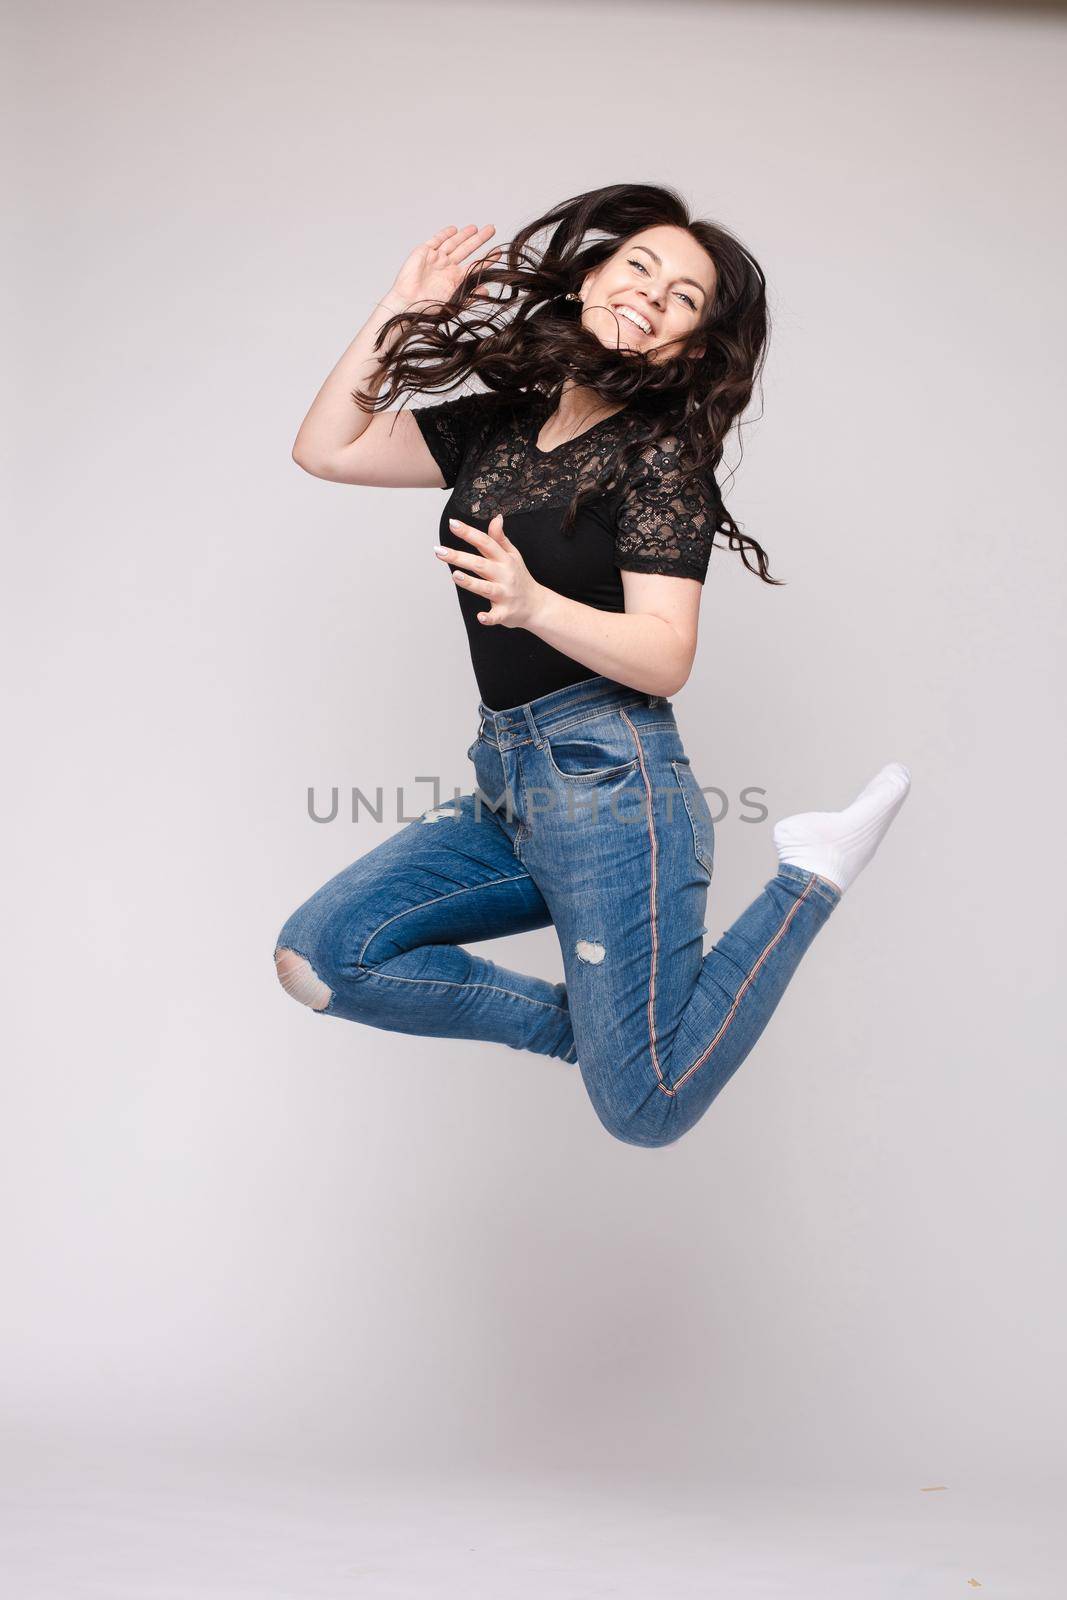 Full length isolate portrait of positive brunette young girl in jeans and t-shirt and sneakers jumping over yellow background. She is smiling at camera.